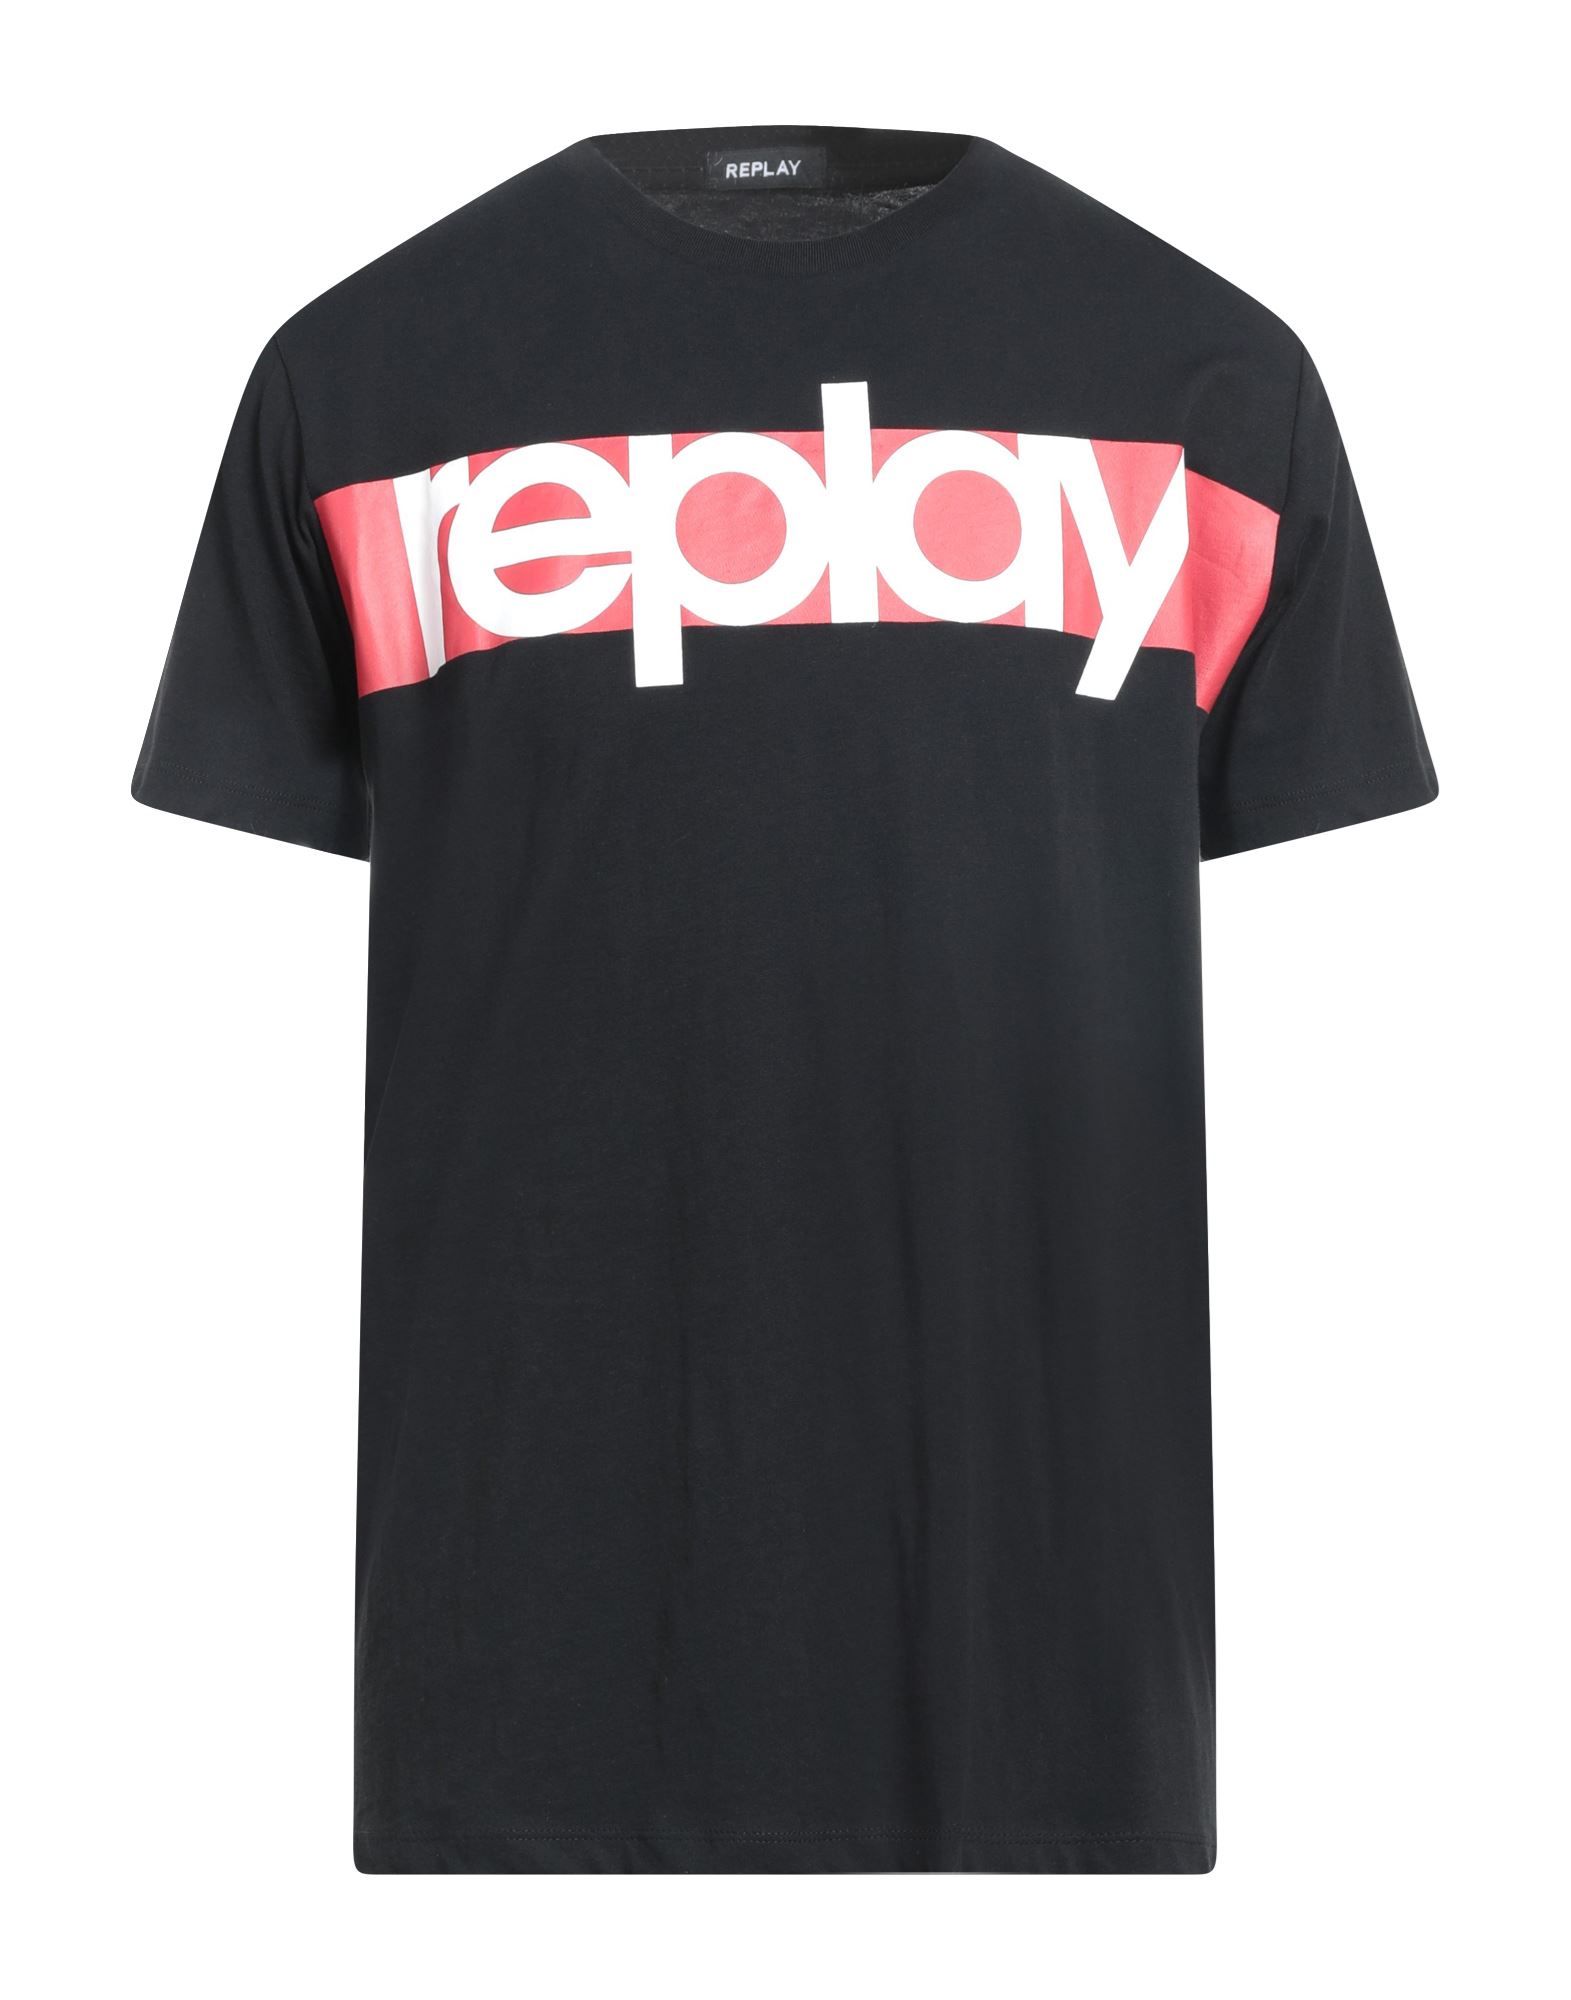 REPLAY COTTON T-SHIRT - REPLAY Online Store